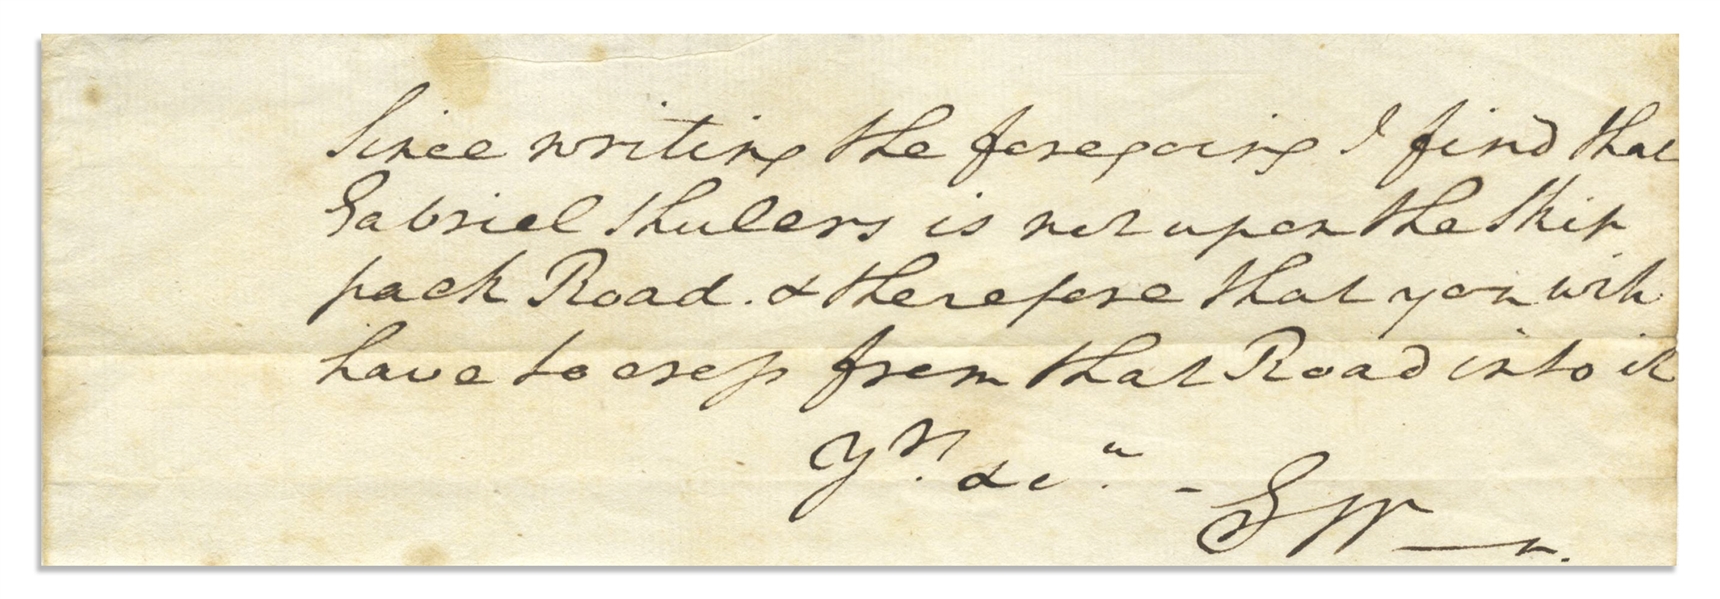 George Washington Autograph Note Signed During the Revolutionary War